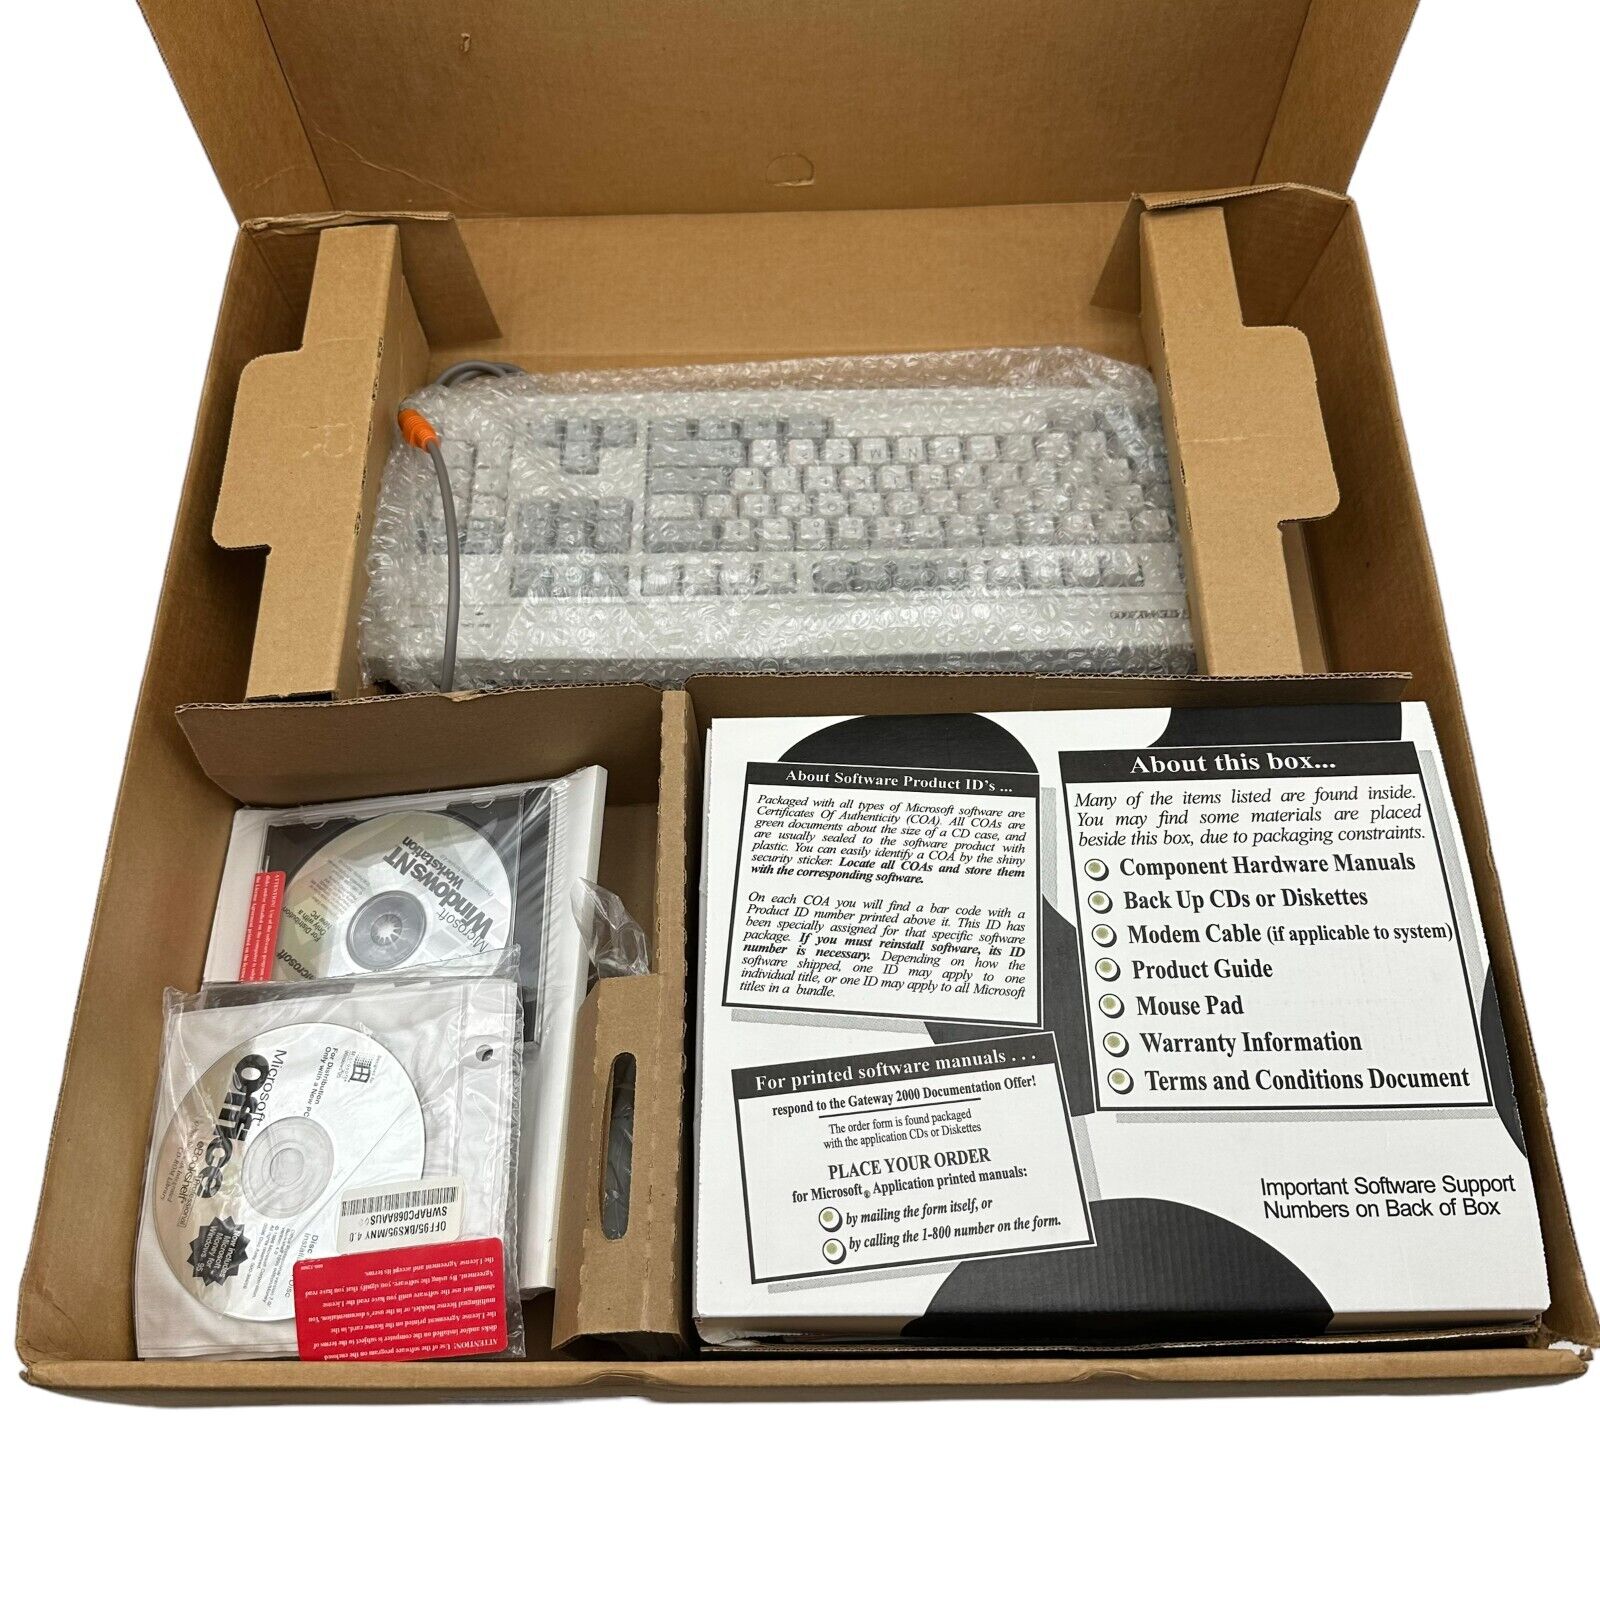 NEW - Gateway 2000 Keyboard, Mouse, Mousepad, Start Guide and More RARE